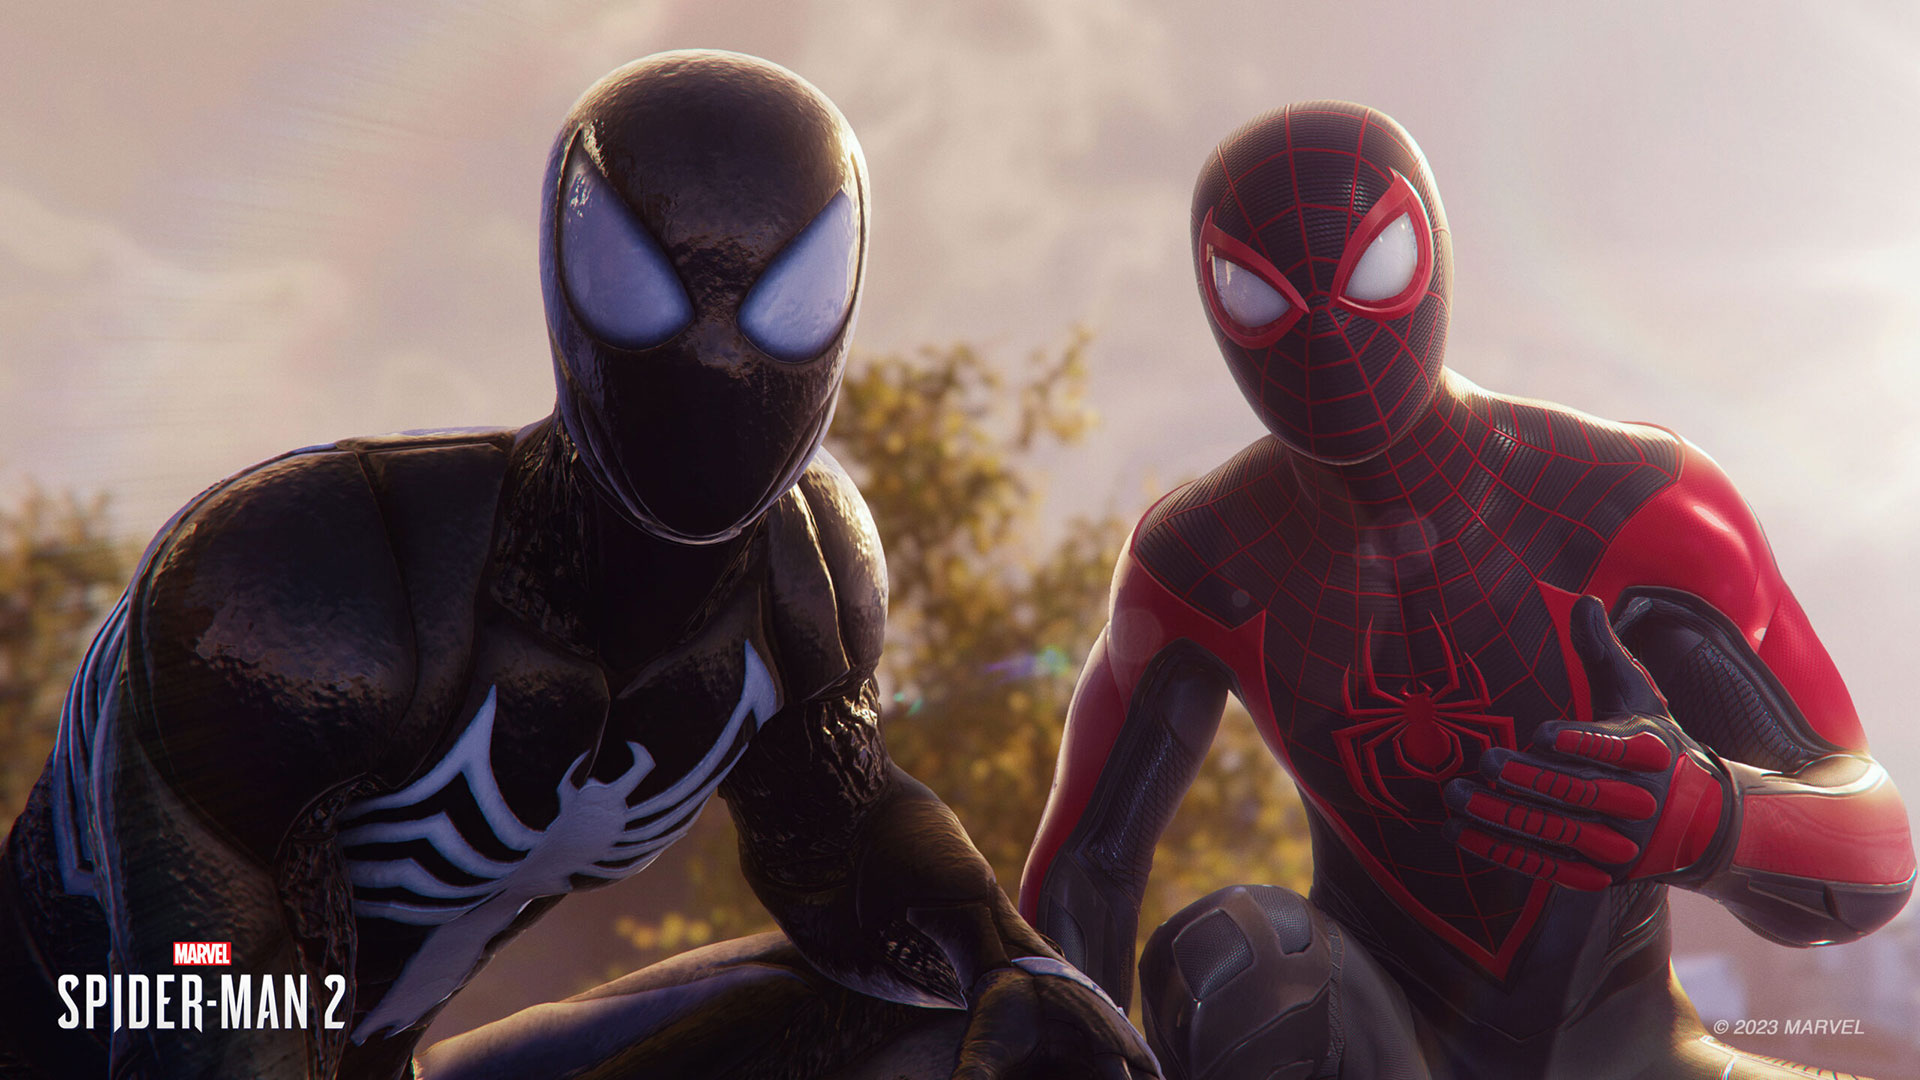 Insomniac Games has announced that Marvel's Spider-Man 2 has gone gold